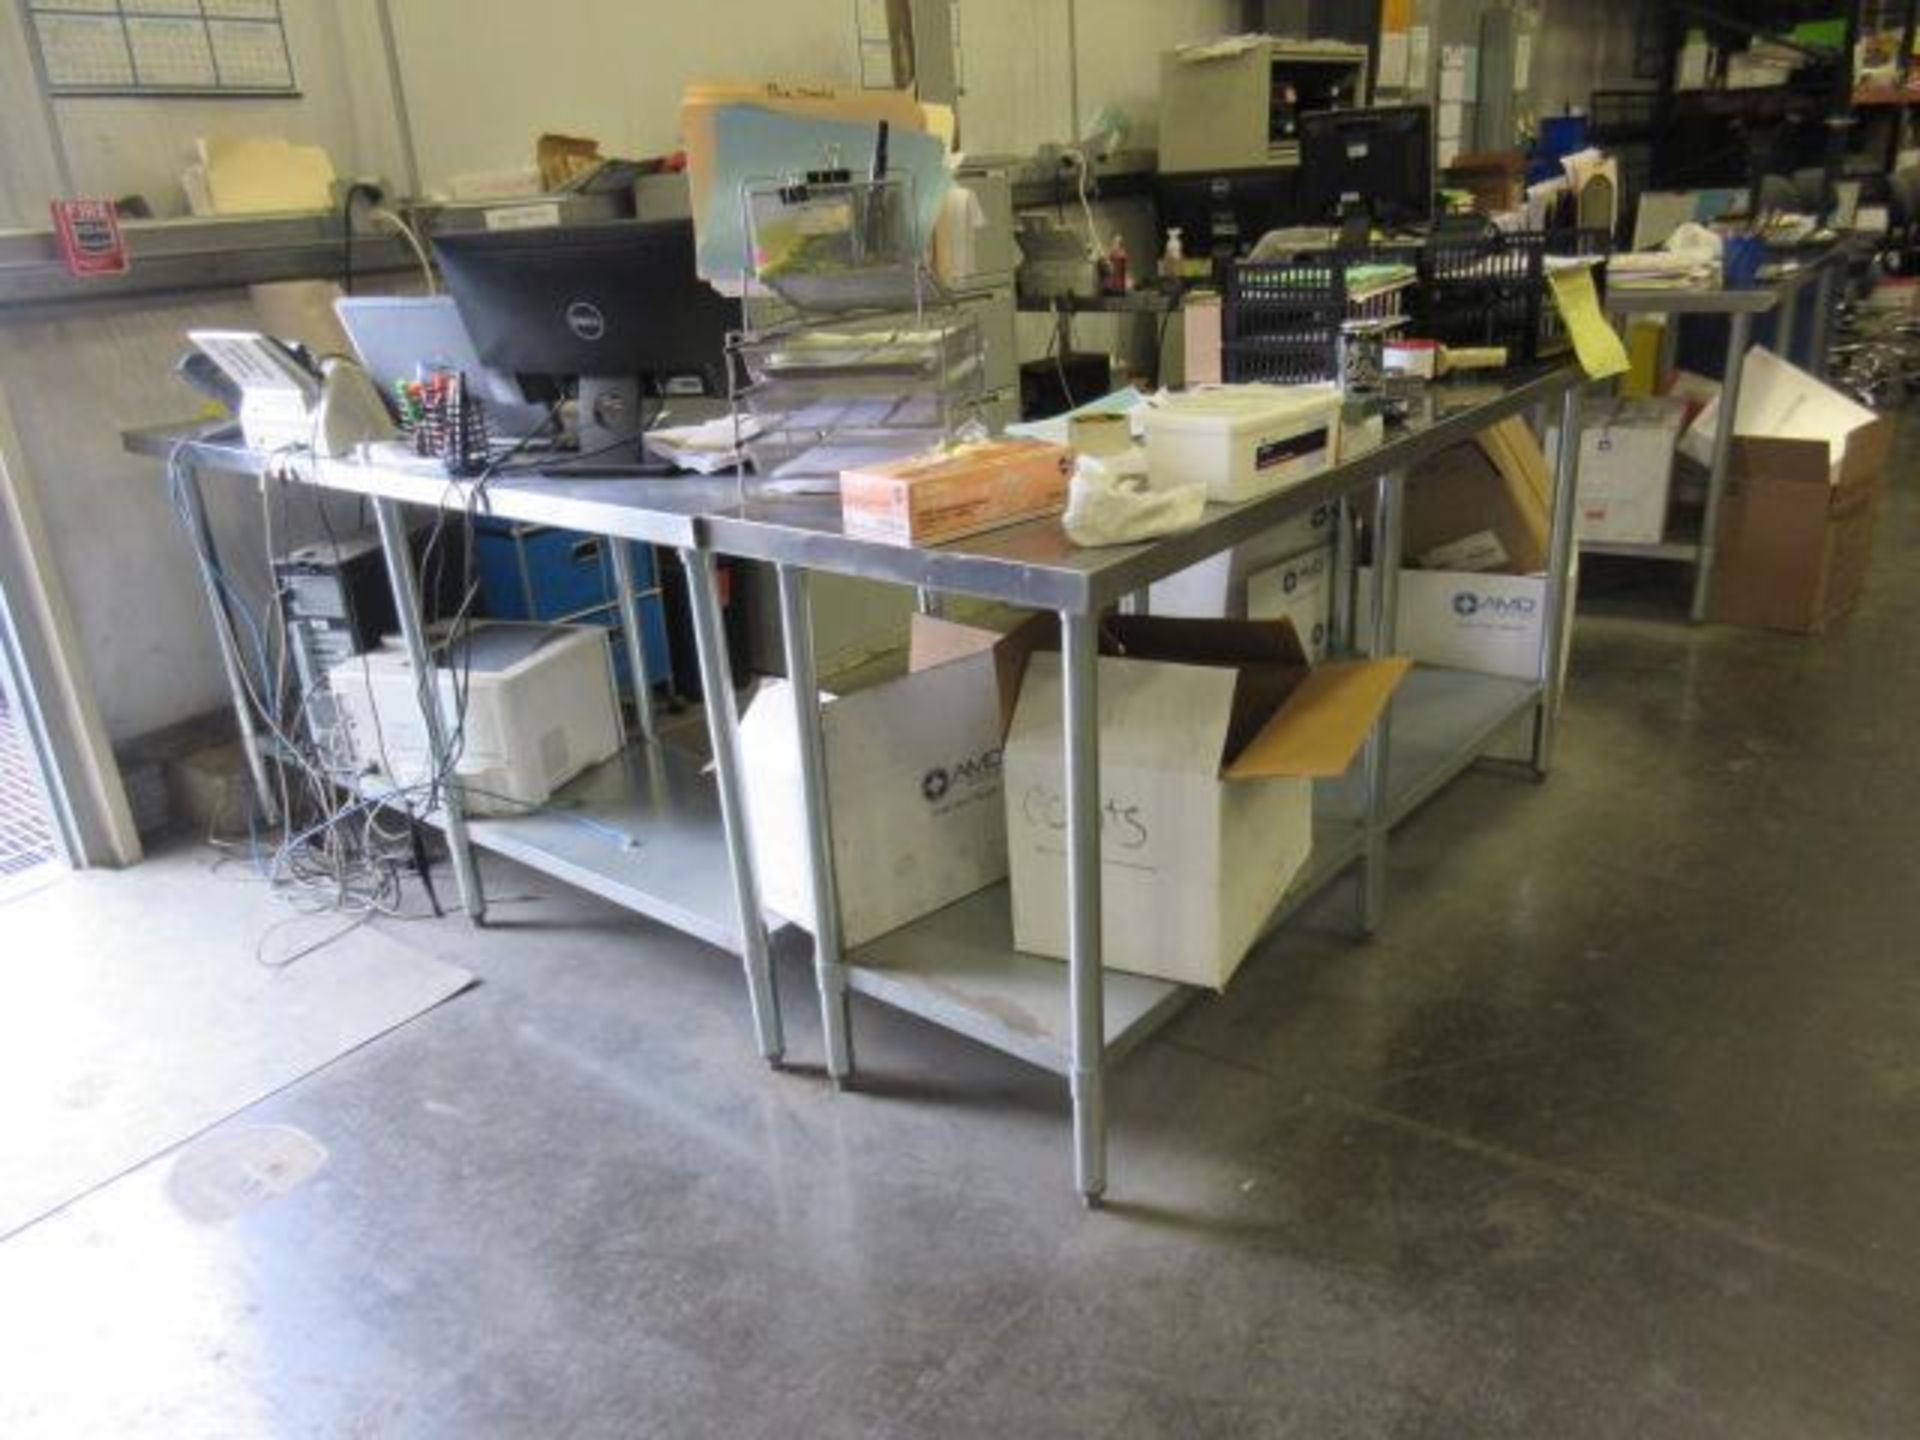 Stainless Steel Flat Top Work Tables - Image 2 of 3